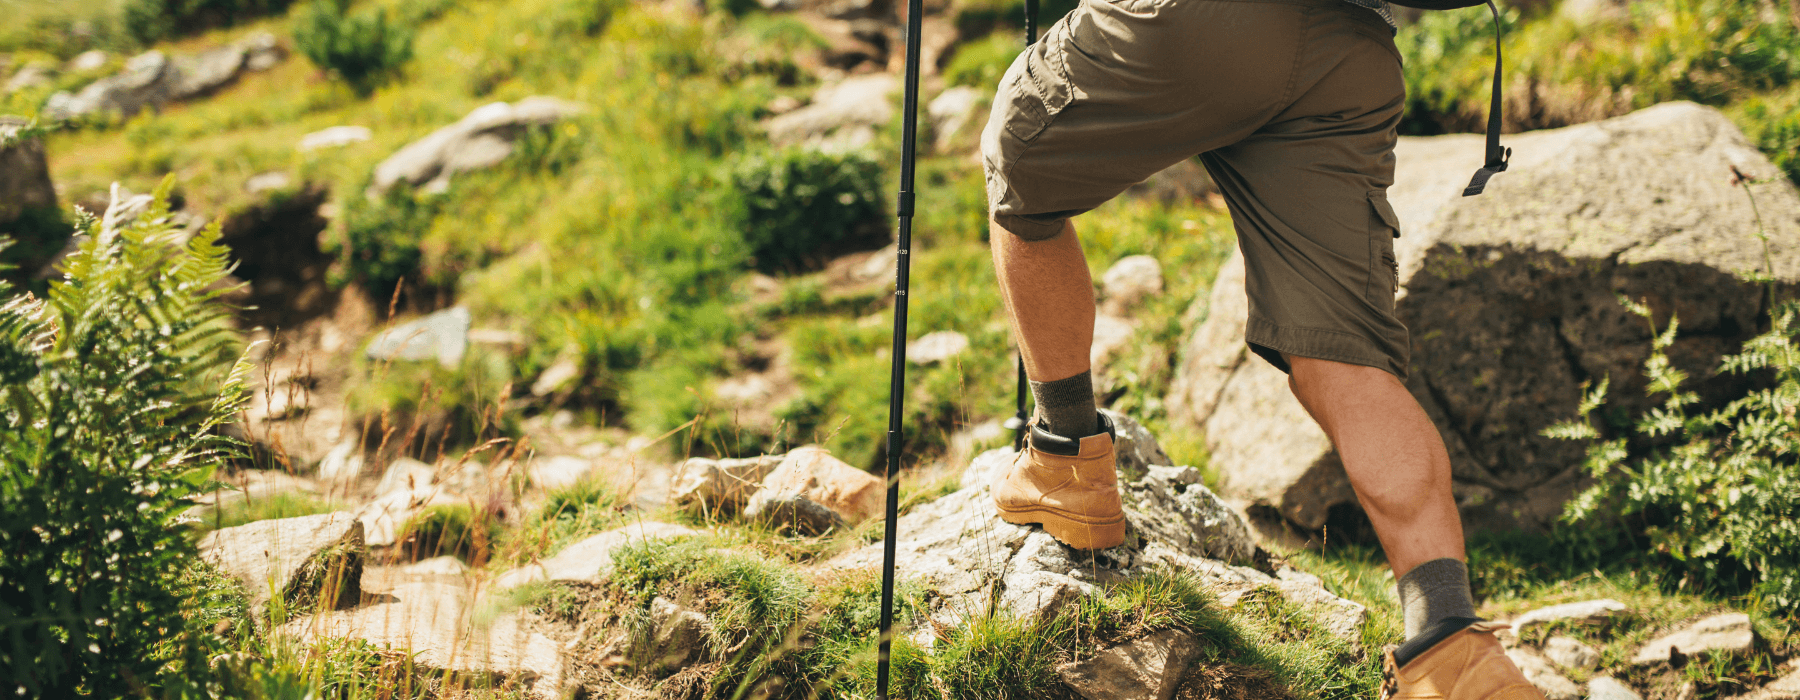 Close-up of a hiker's legs wearing shorts and hiking boots, with a trekking pole, ascending a rocky trail surrounded by greenery.